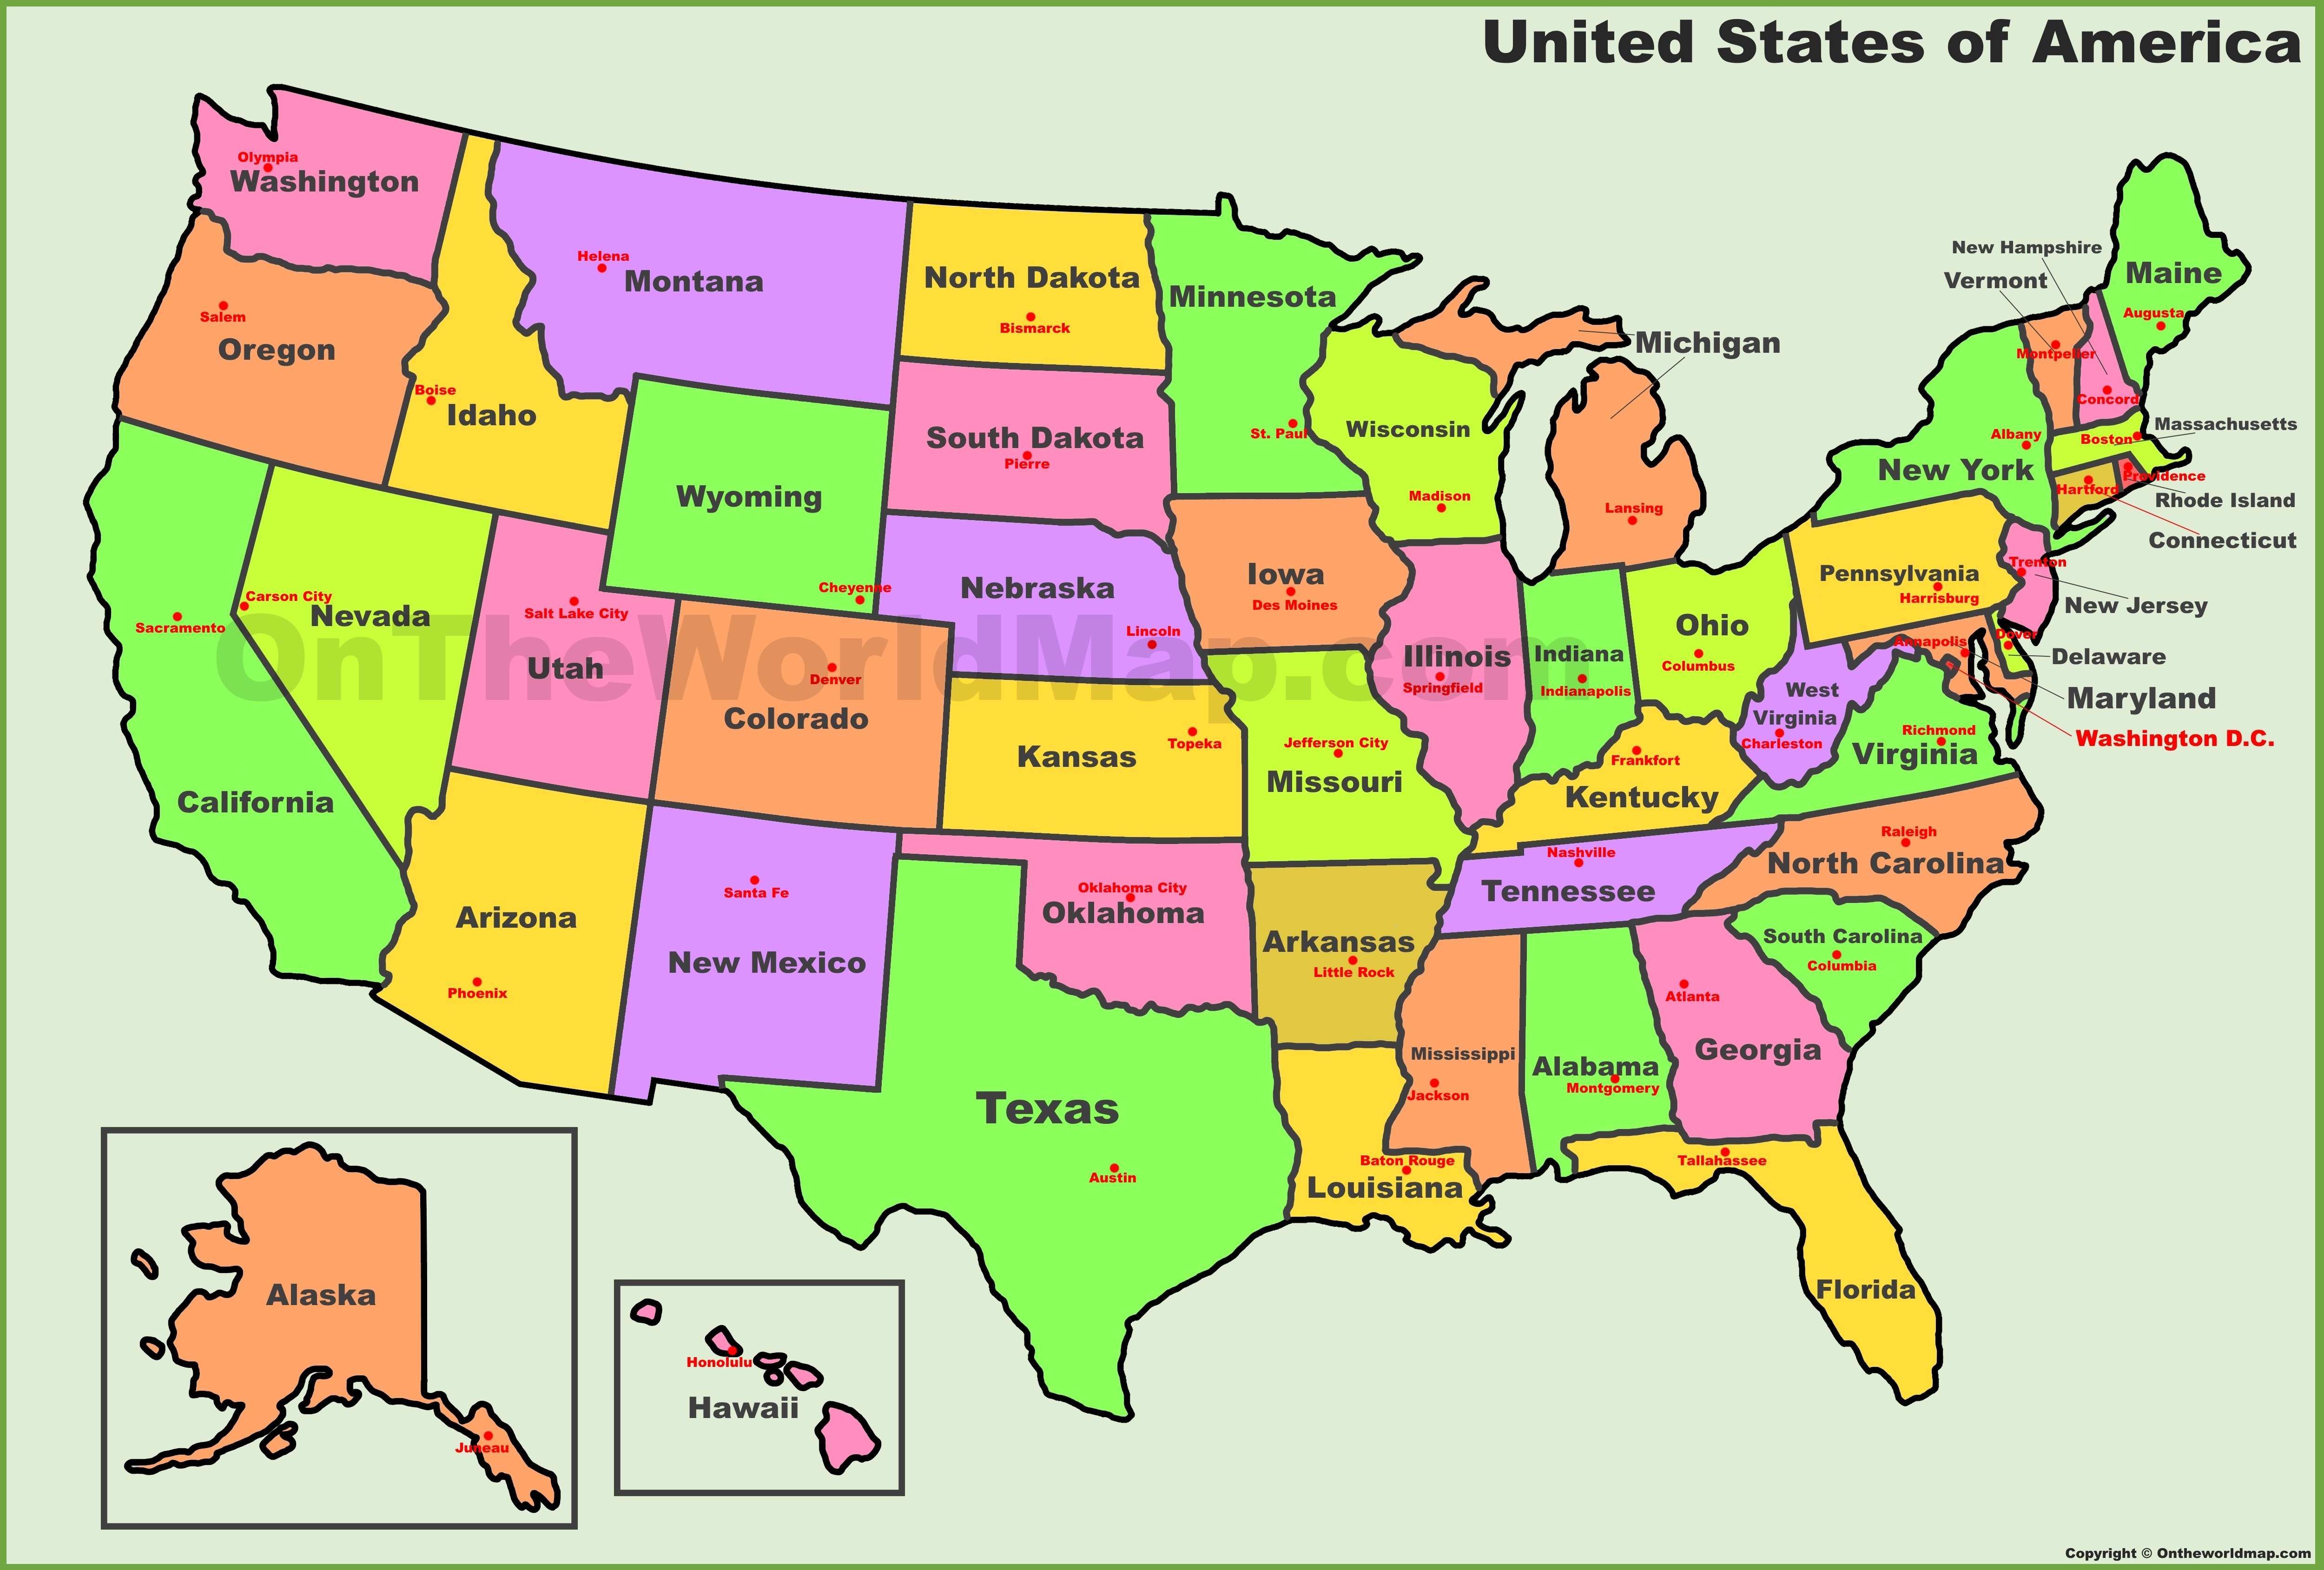 U.S. States and Capitals Map